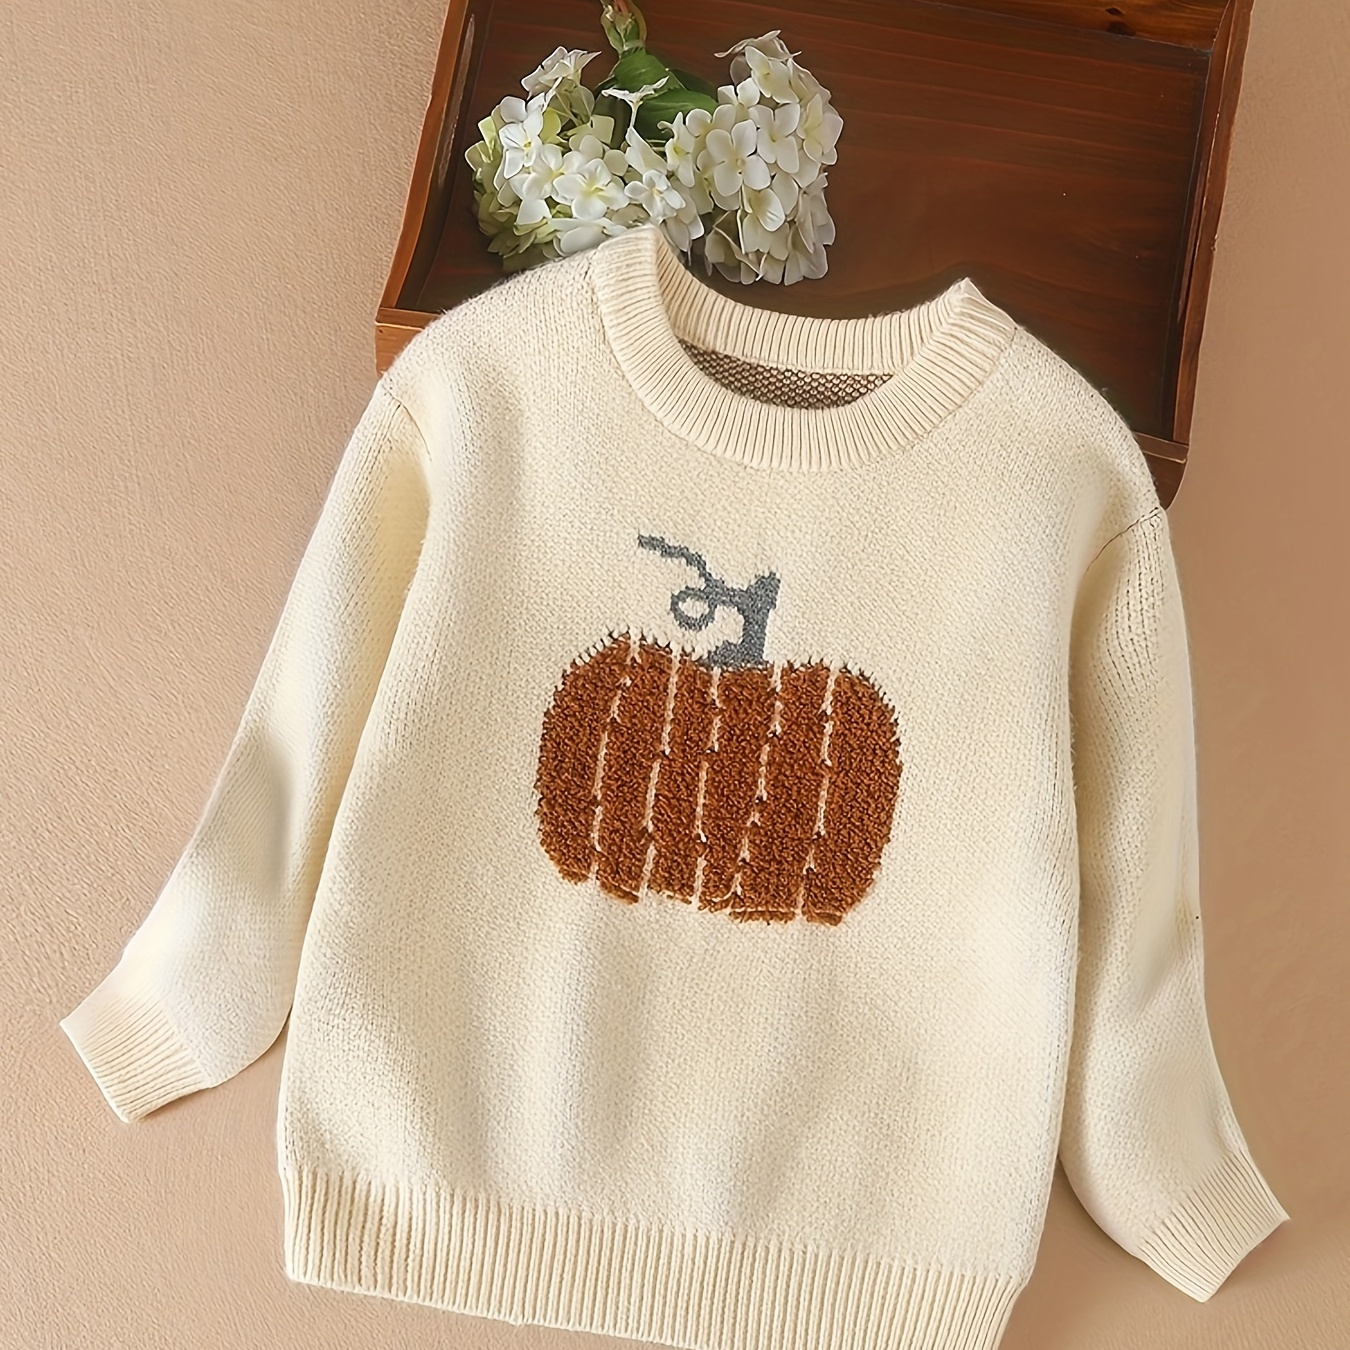 

Kuyixiong Pumpkin Pattern Pullover Sweater For Girls, Long Sleeve Warm Sweater Top Undershirt 1pc